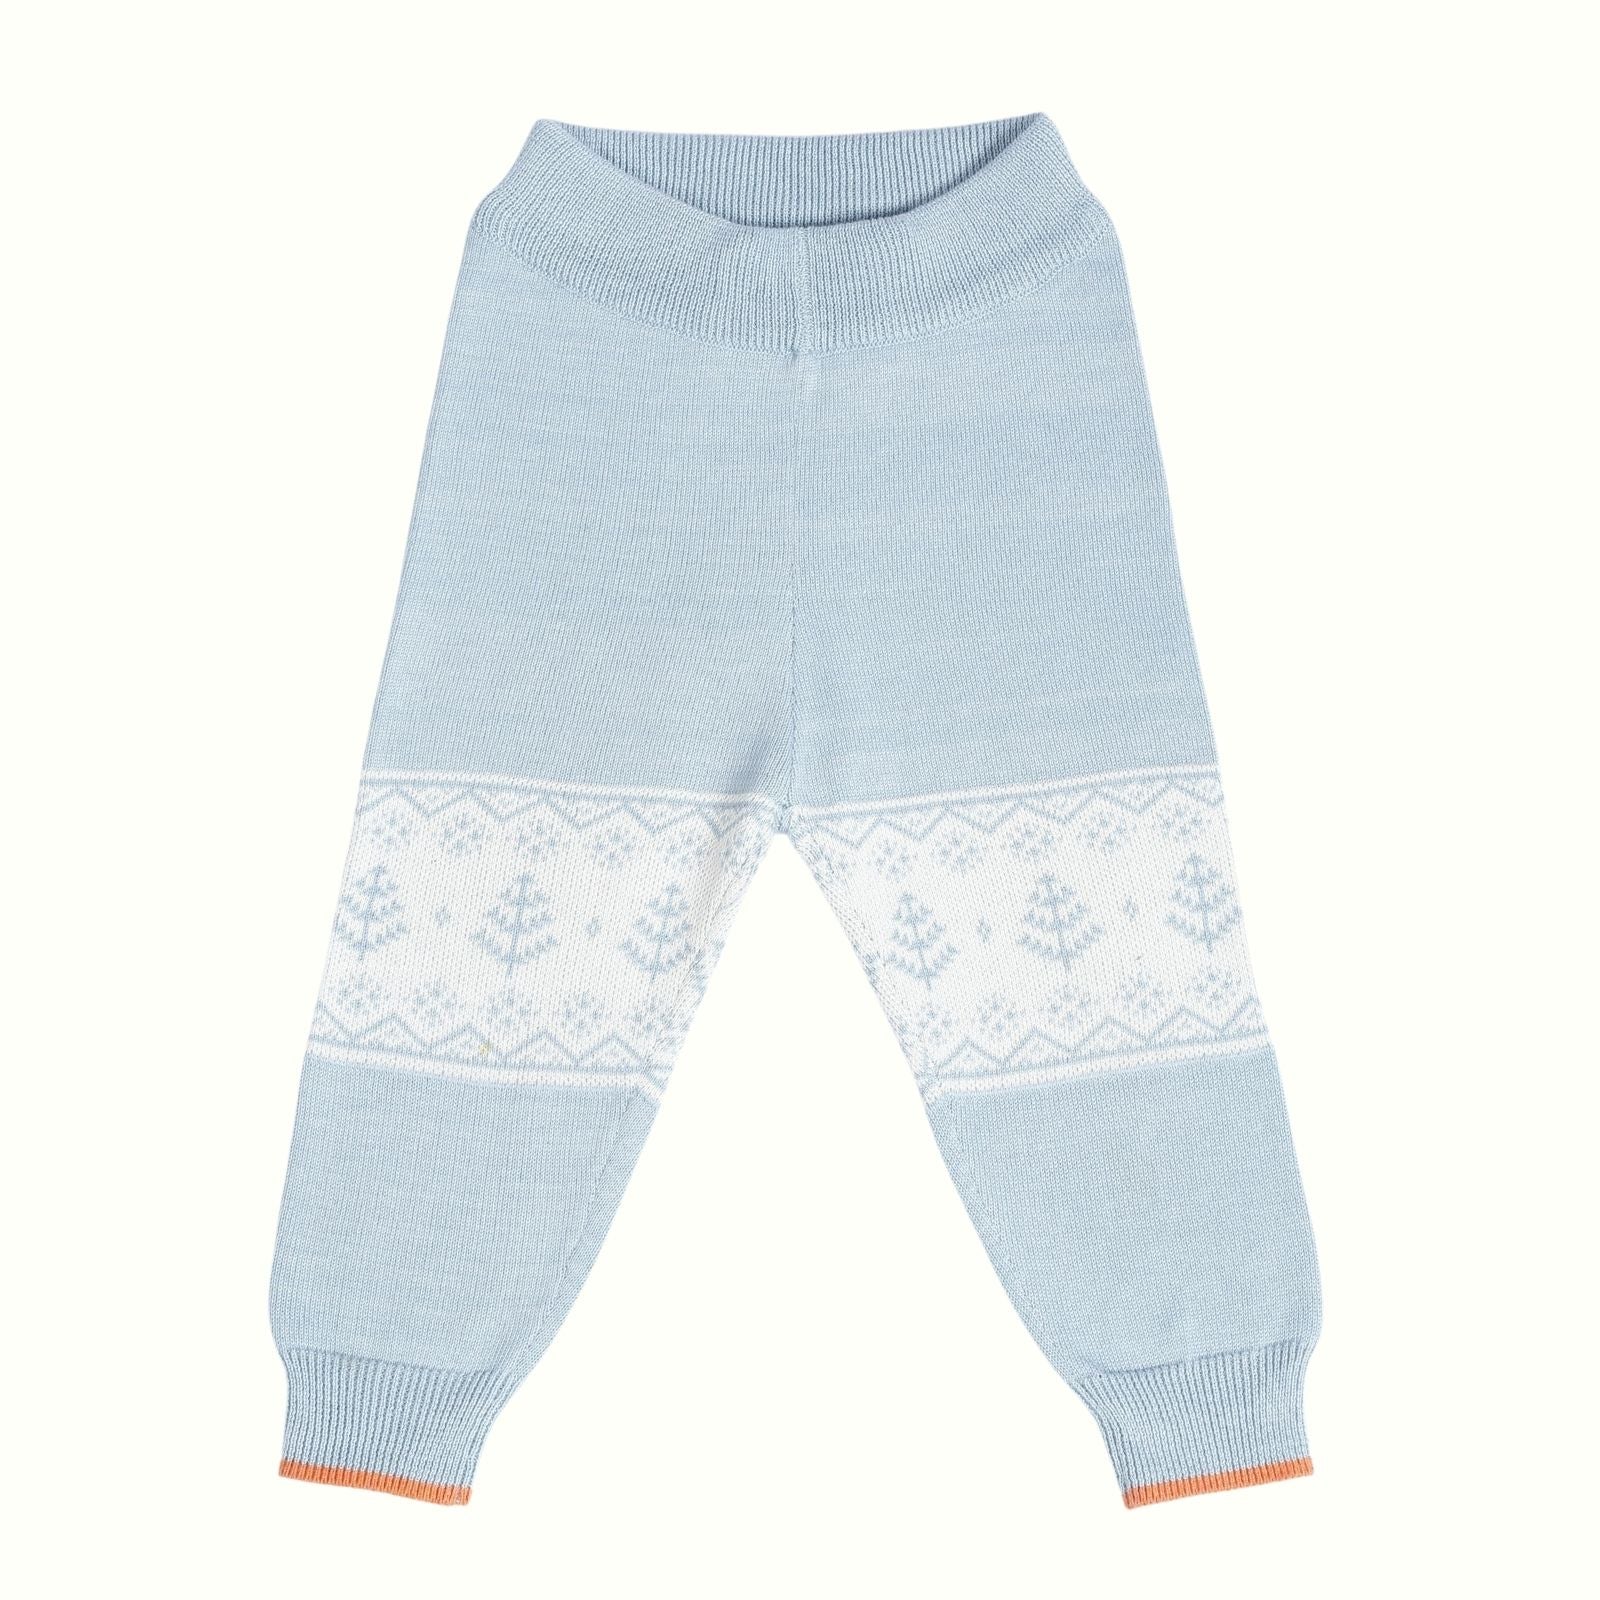 Greendeer Delighted Lion Jacquard 100% Cotton Sweater with Lower - Powder Blue & Orange - Set of 2